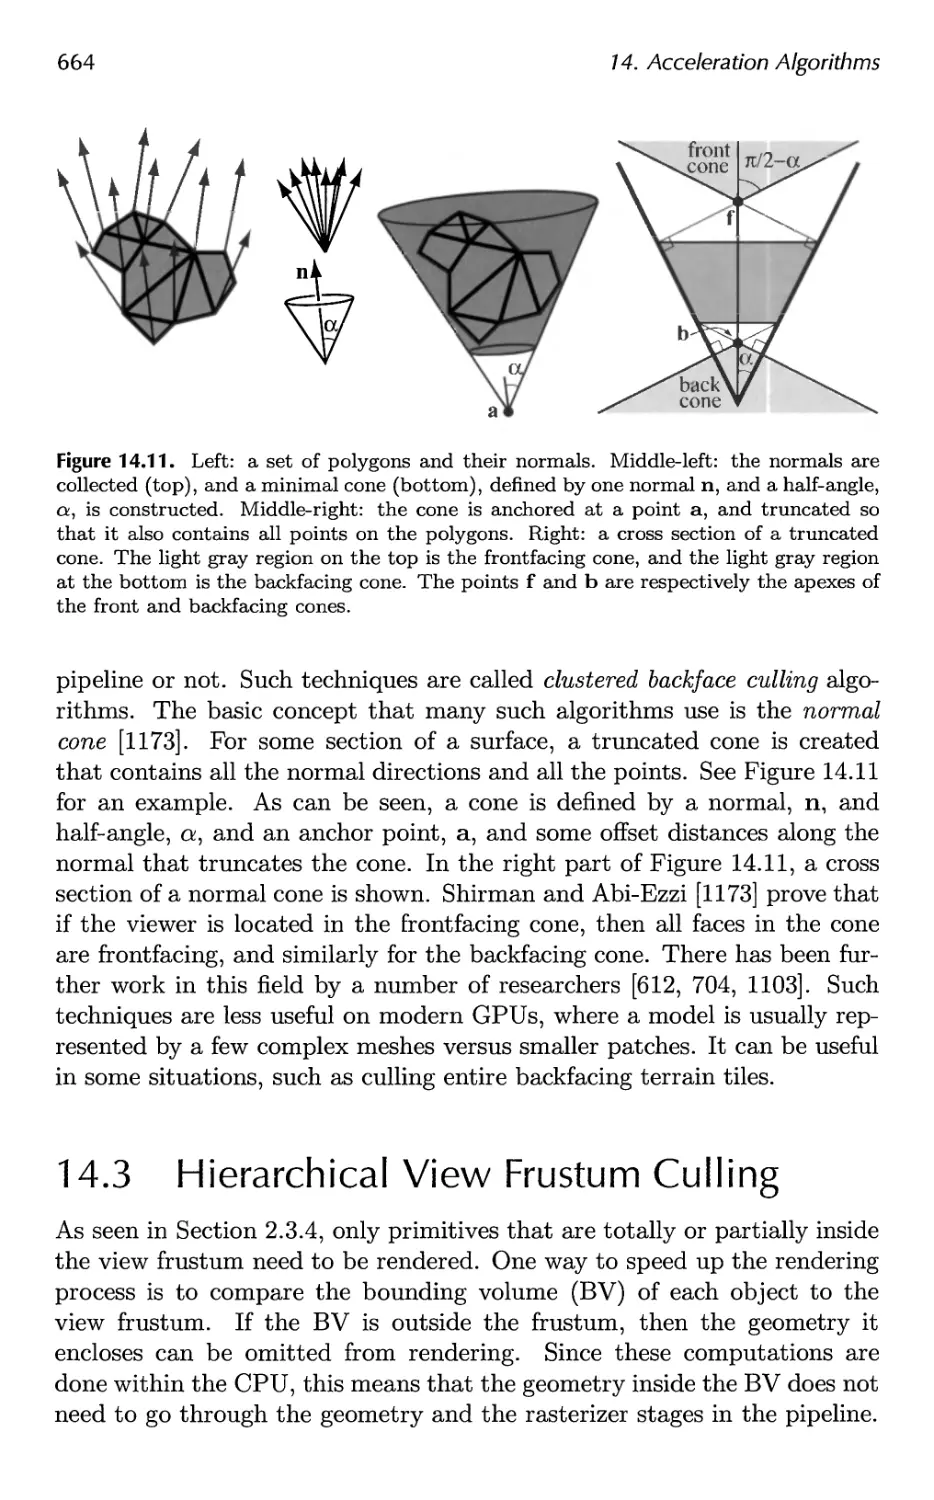 14.3 Hierarchical View Frustum Culling